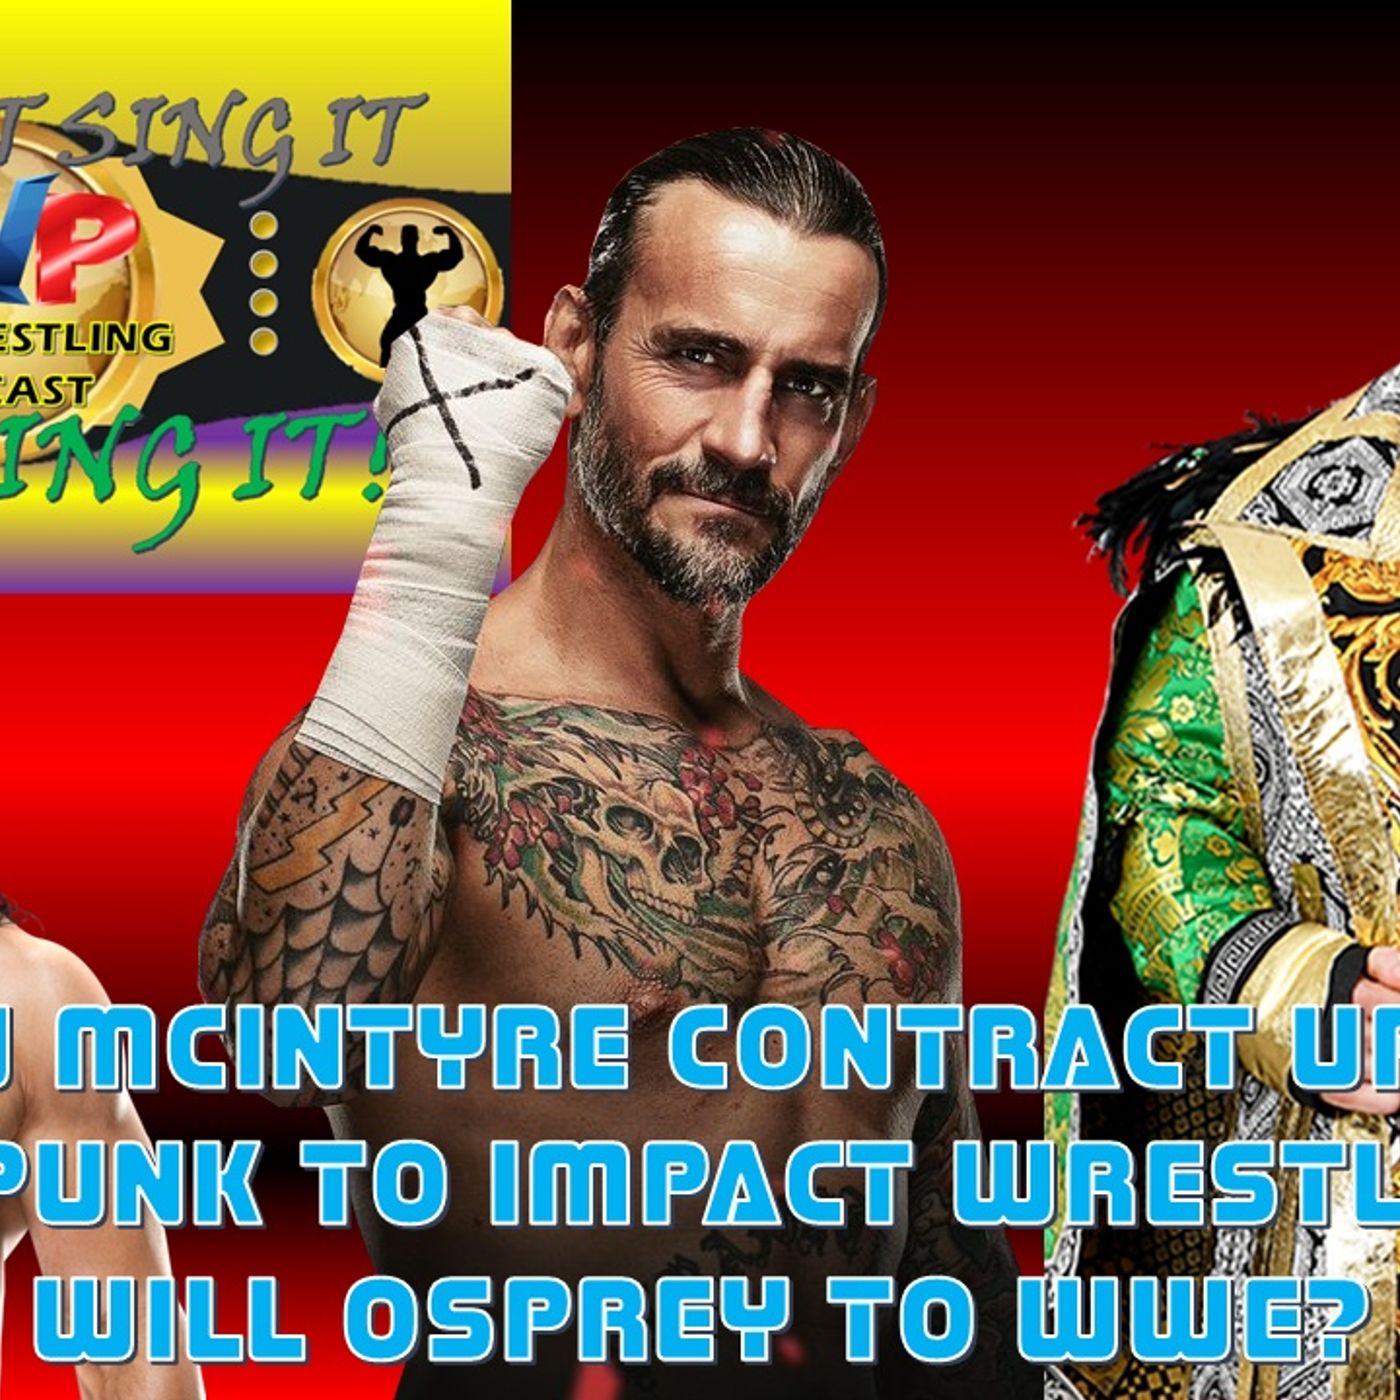 Will Osprey to WWE? - CM Punk to Impact? Contract Updates